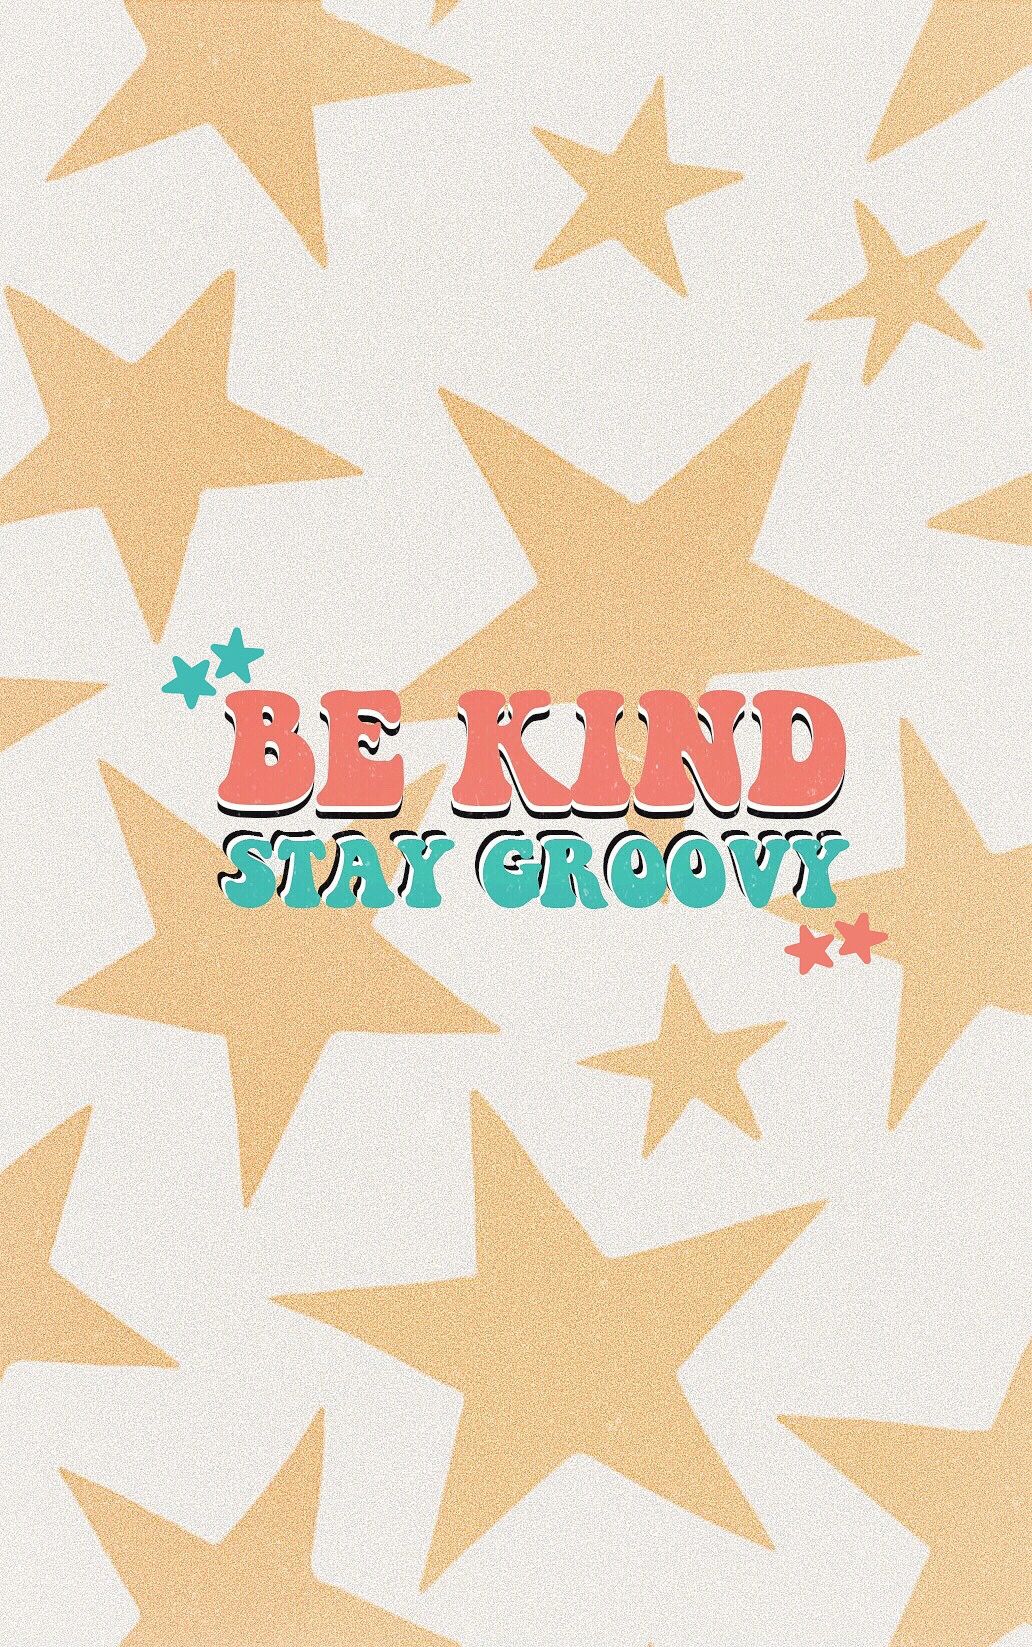 be kind, stay groovy fun little art by me. Parking spot painting, Happy wallpaper, Aesthetic iphone wallpaper